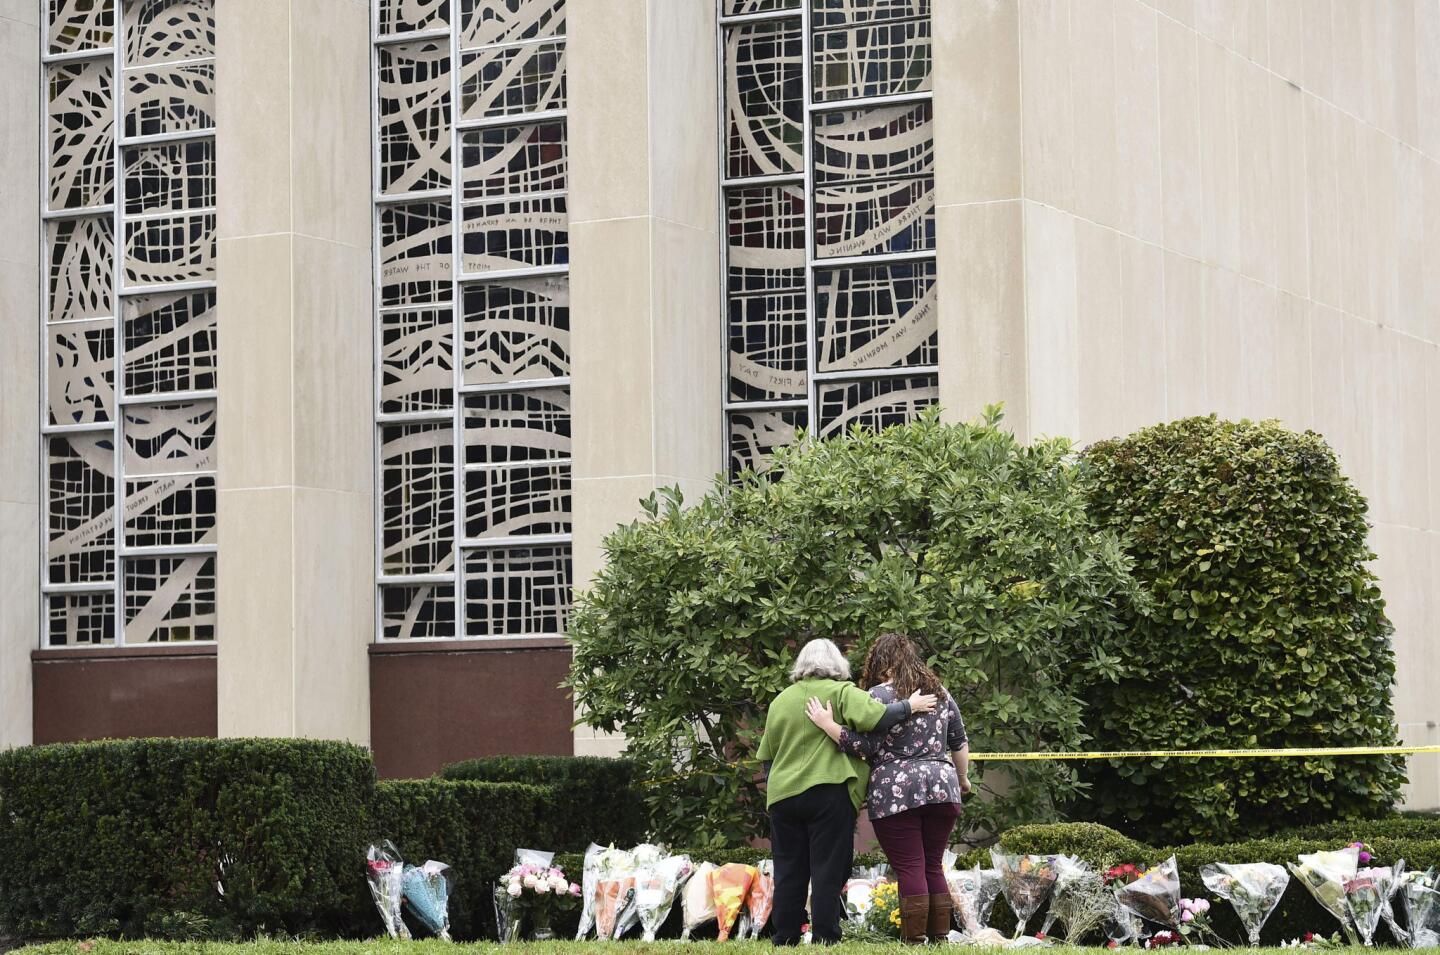 Women embrace in front of memorial outside the Tree of Life synagogue in Pittsburgh on Oct. 28, 2018, after a shooting there the previous day left 11 people dead.